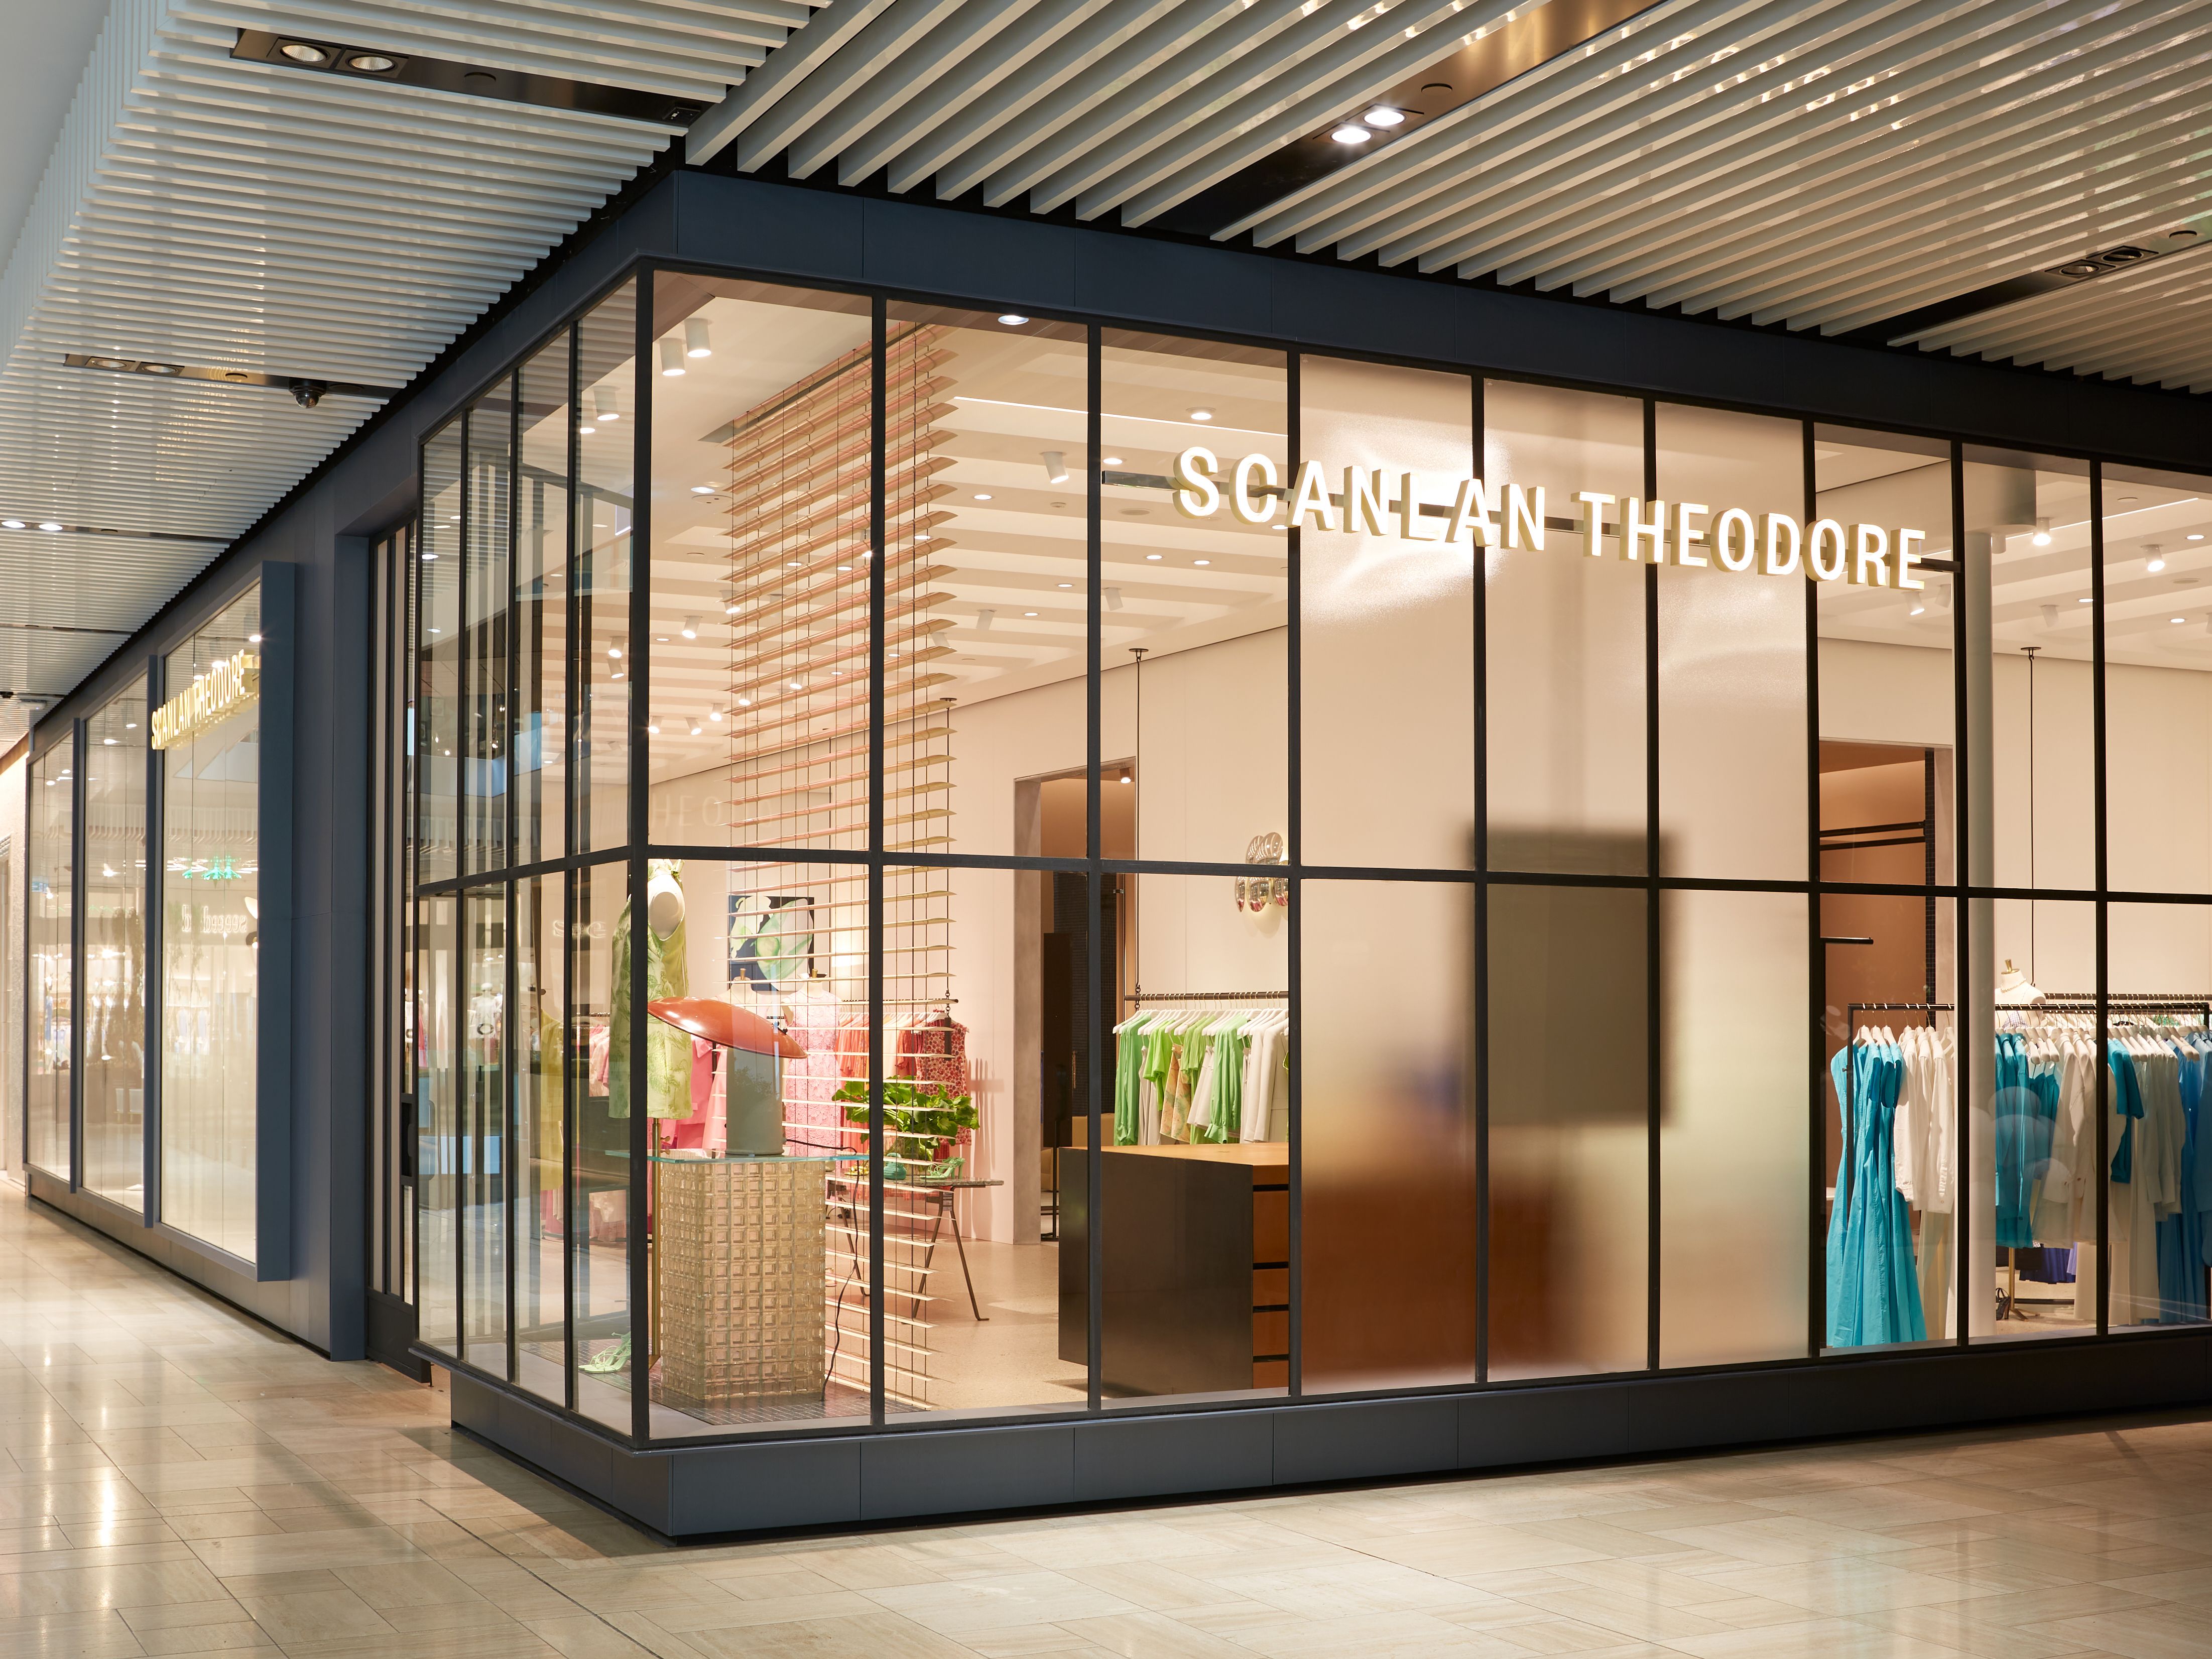 Exterior shot of the Scanlan Theodore boutique in a shopping centre